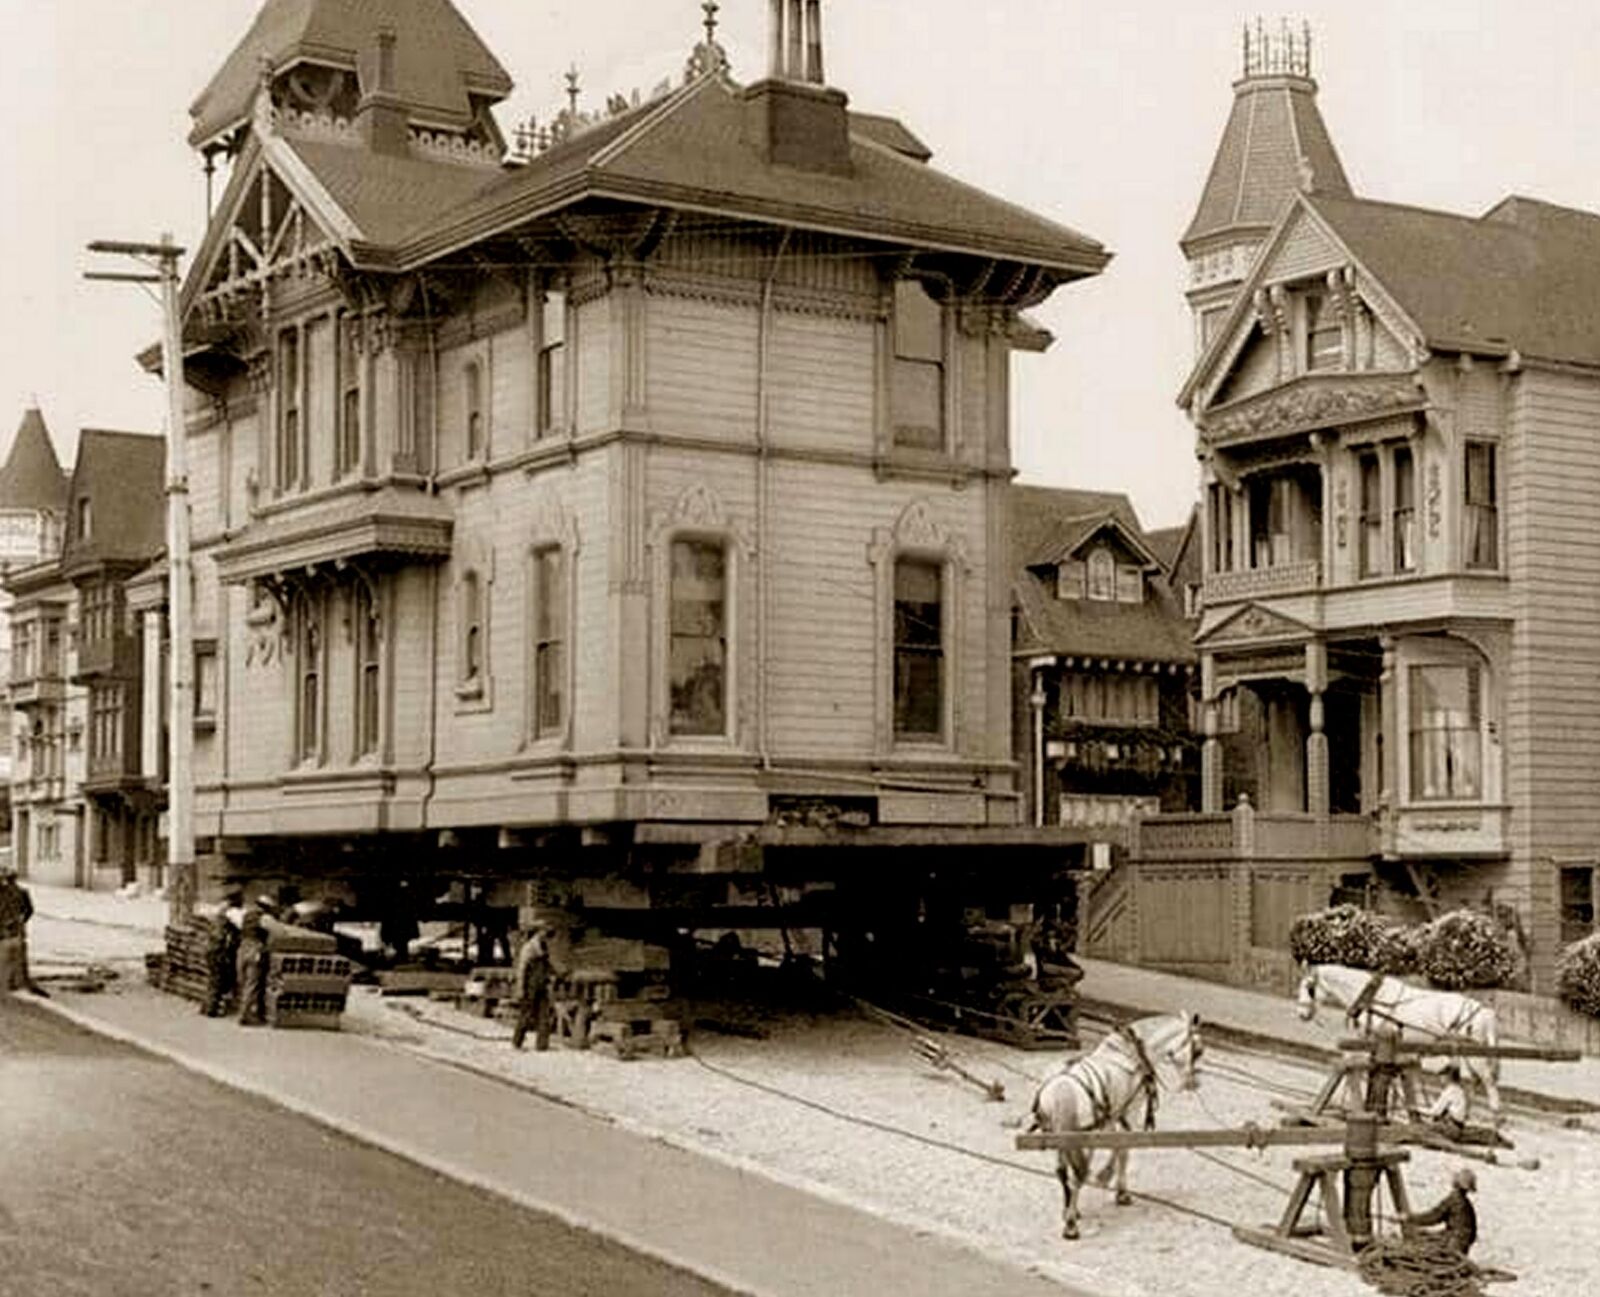 1908 San Francisco MOVING A HOUSE WITH HORSES 5X7 Photo  (208-G)